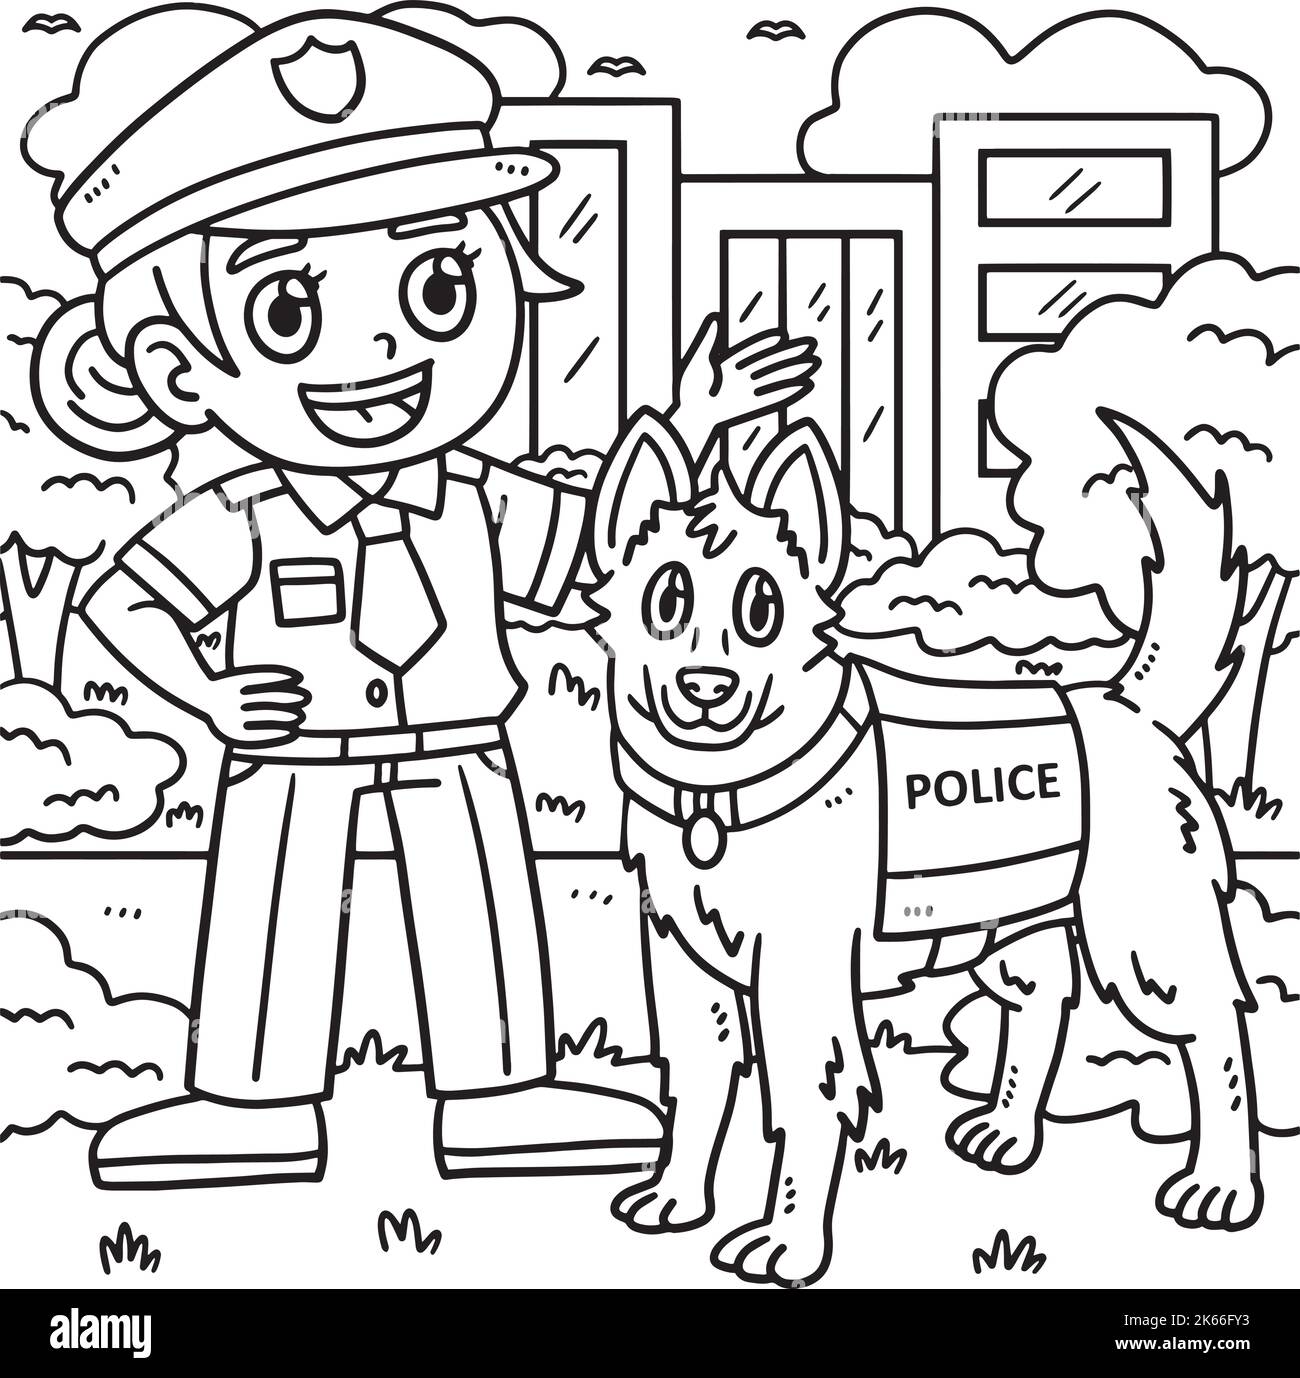 Police Officer and Police Dog Coloring Page Stock Vector